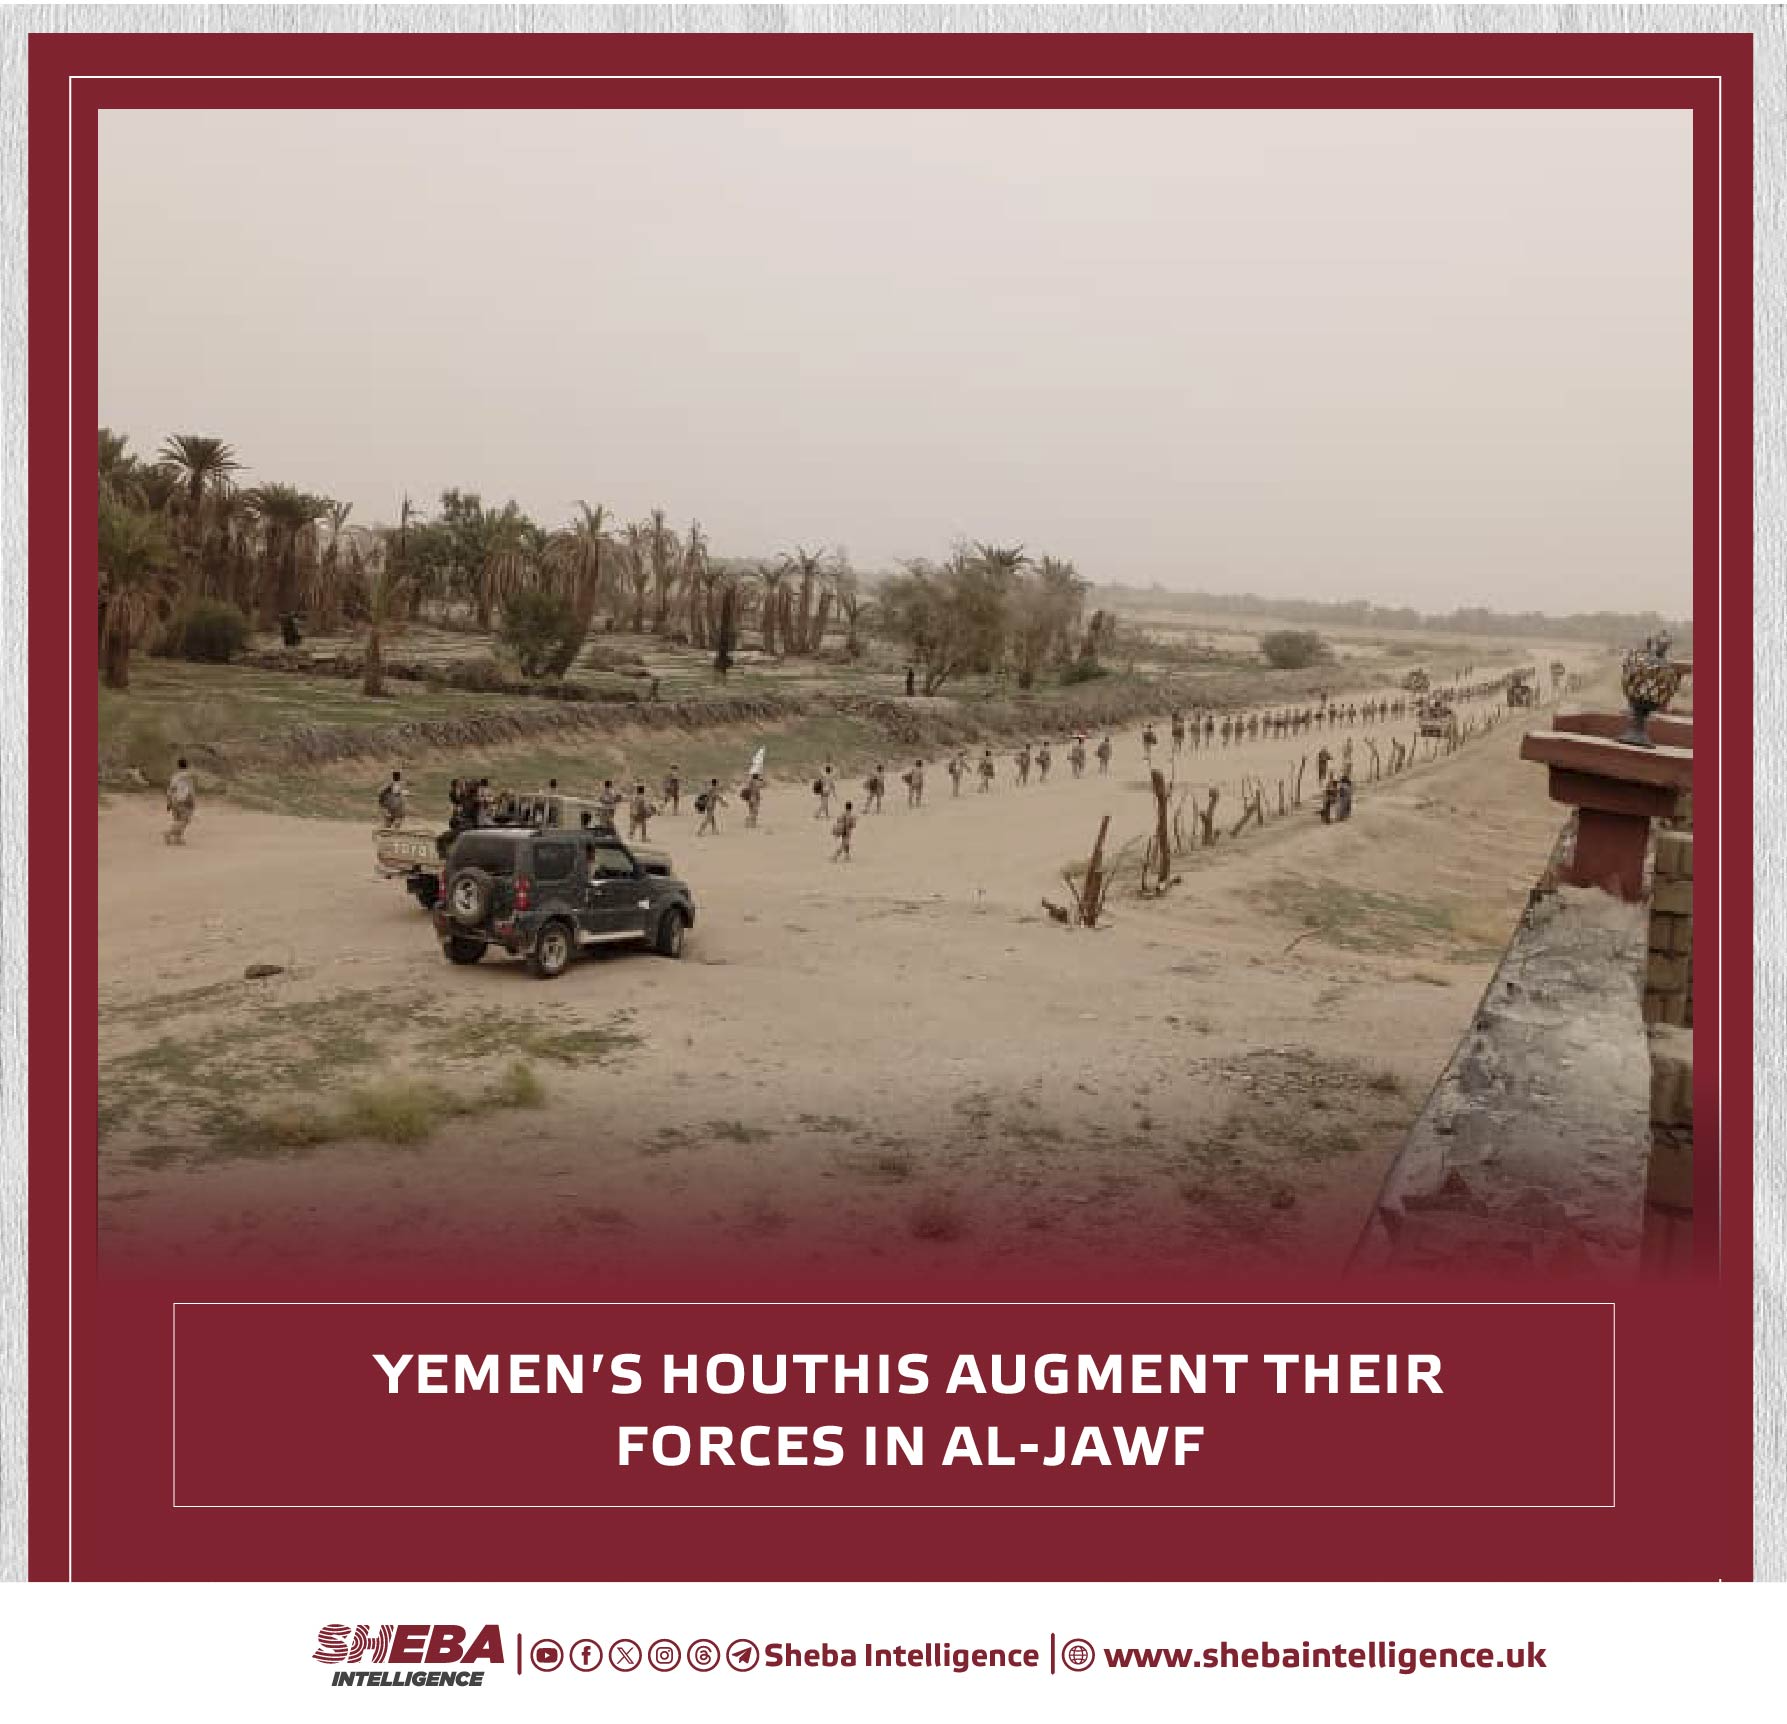 Yemen's Houthis Augment Their Forces in Al-Jawf